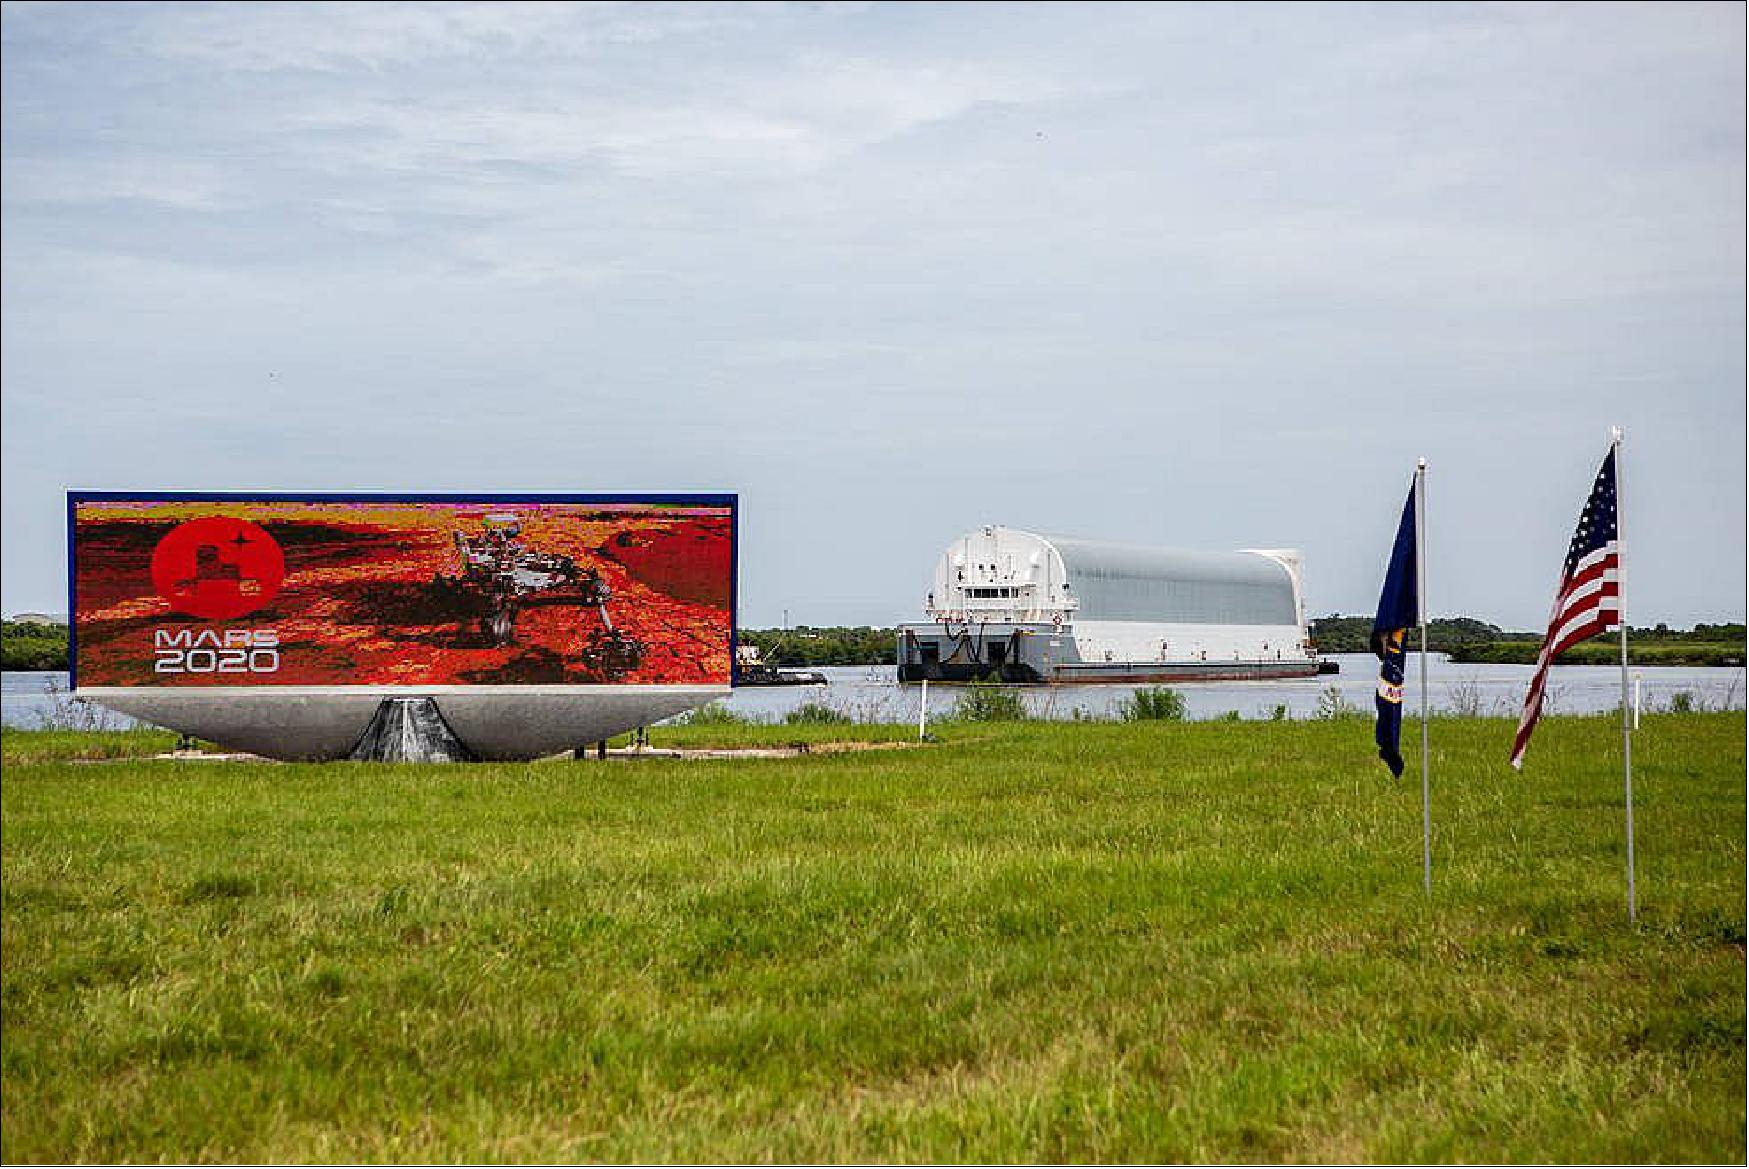 Figure 39: NASA's Pegasus barge, carrying the launch vehicle stage adapter (LVSA) for the agency's Space Launch System (SLS) rocket, arrives at the Kennedy Space Center Launch Complex 39 turn basin wharf on July 29, 2020. Traveling to Florida from NASA's Marshall Space Flight Center in Huntsville, Alabama, the LVSA will connect the SLS core stage to the rocket's upper stage for the Artemis I launch (image credit: NASA/Isaac Watson)